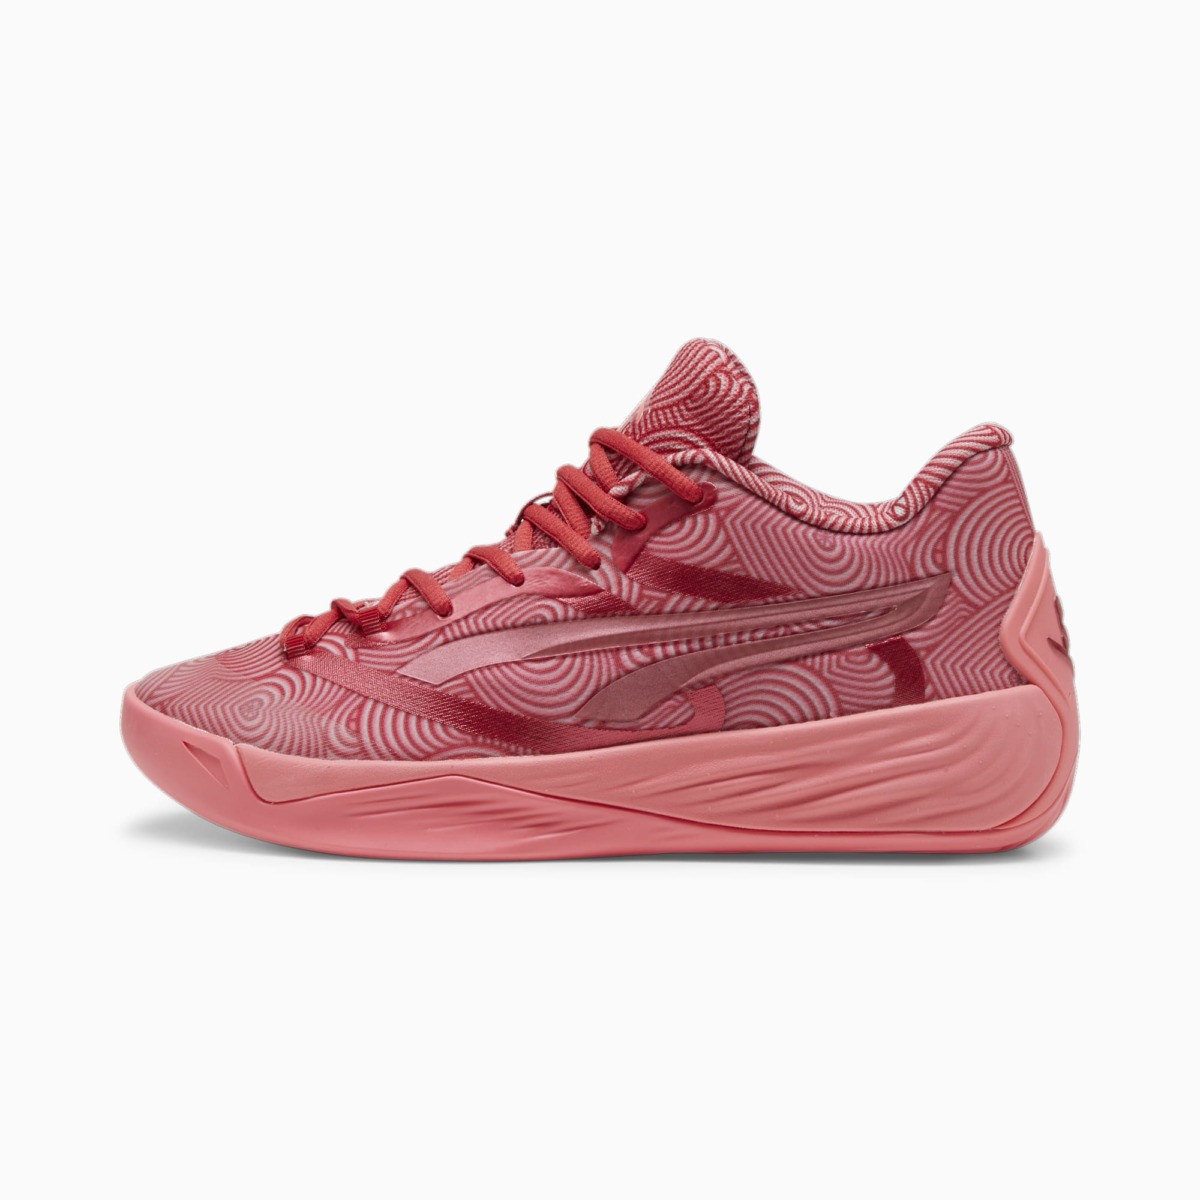 Basketball Shoes in Red for Woman from Puma GOOFASH